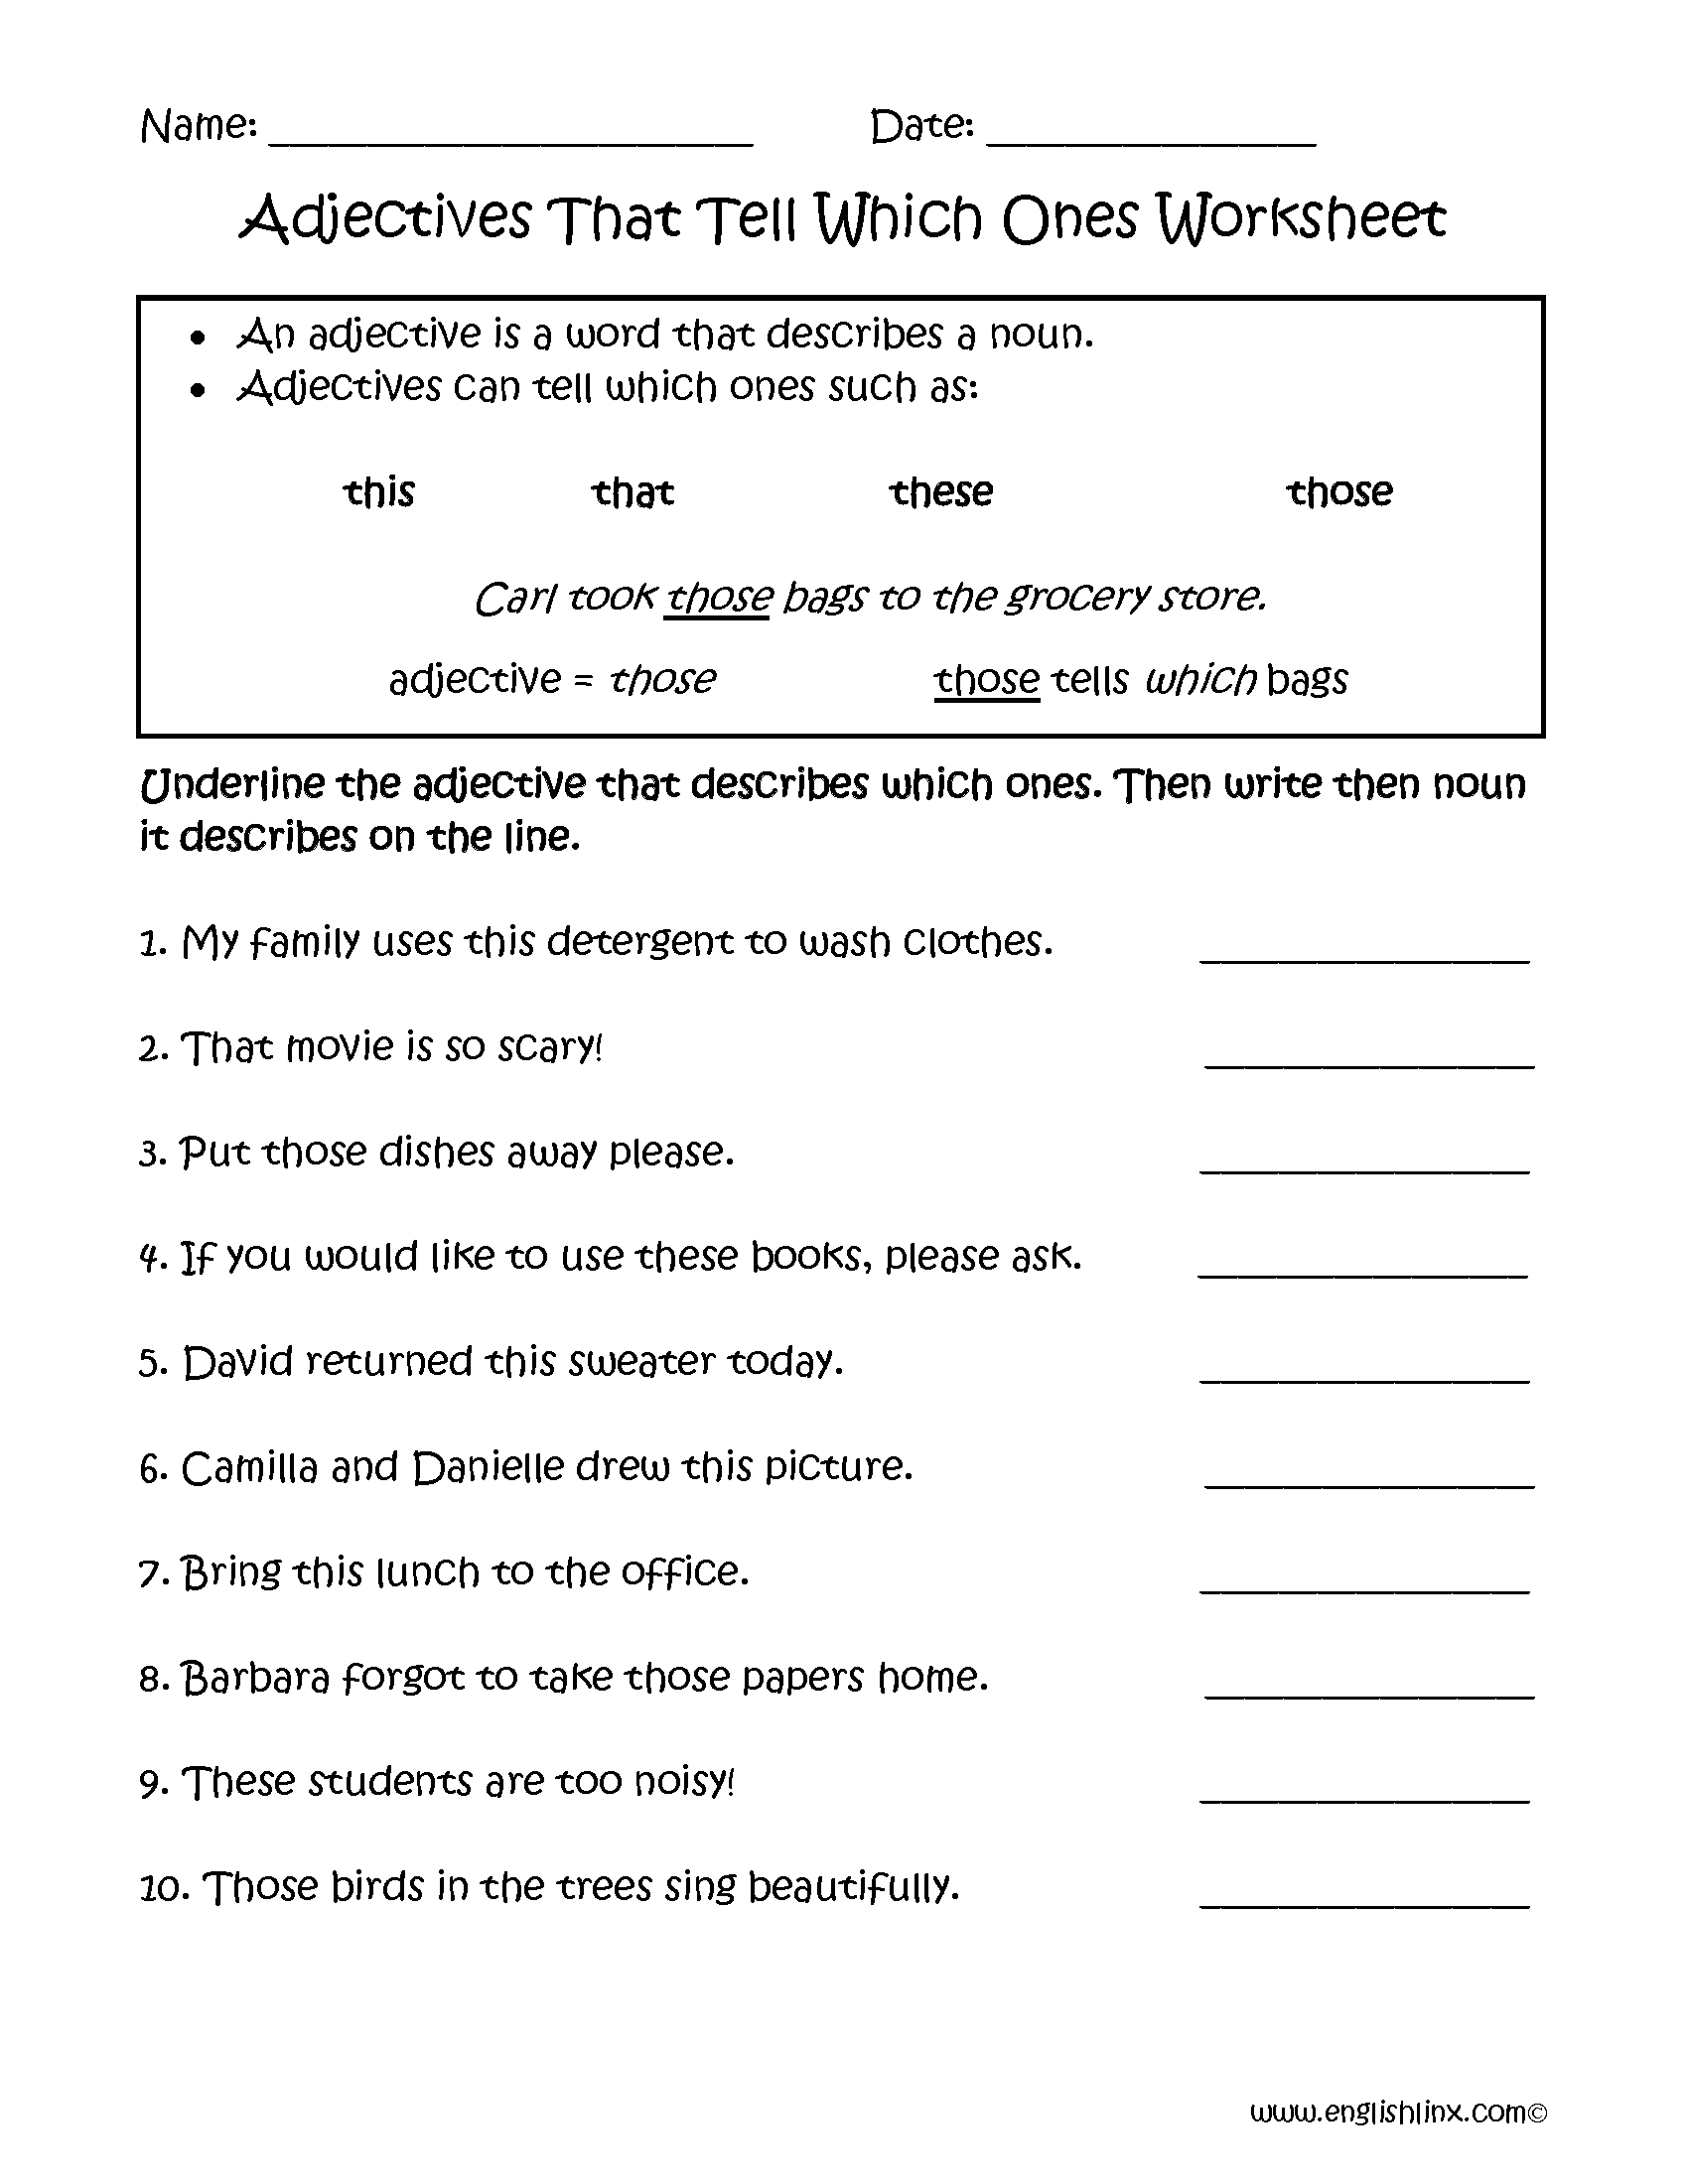 Adjectives That Tell Which Ones Worksheets Adjective Worksheet